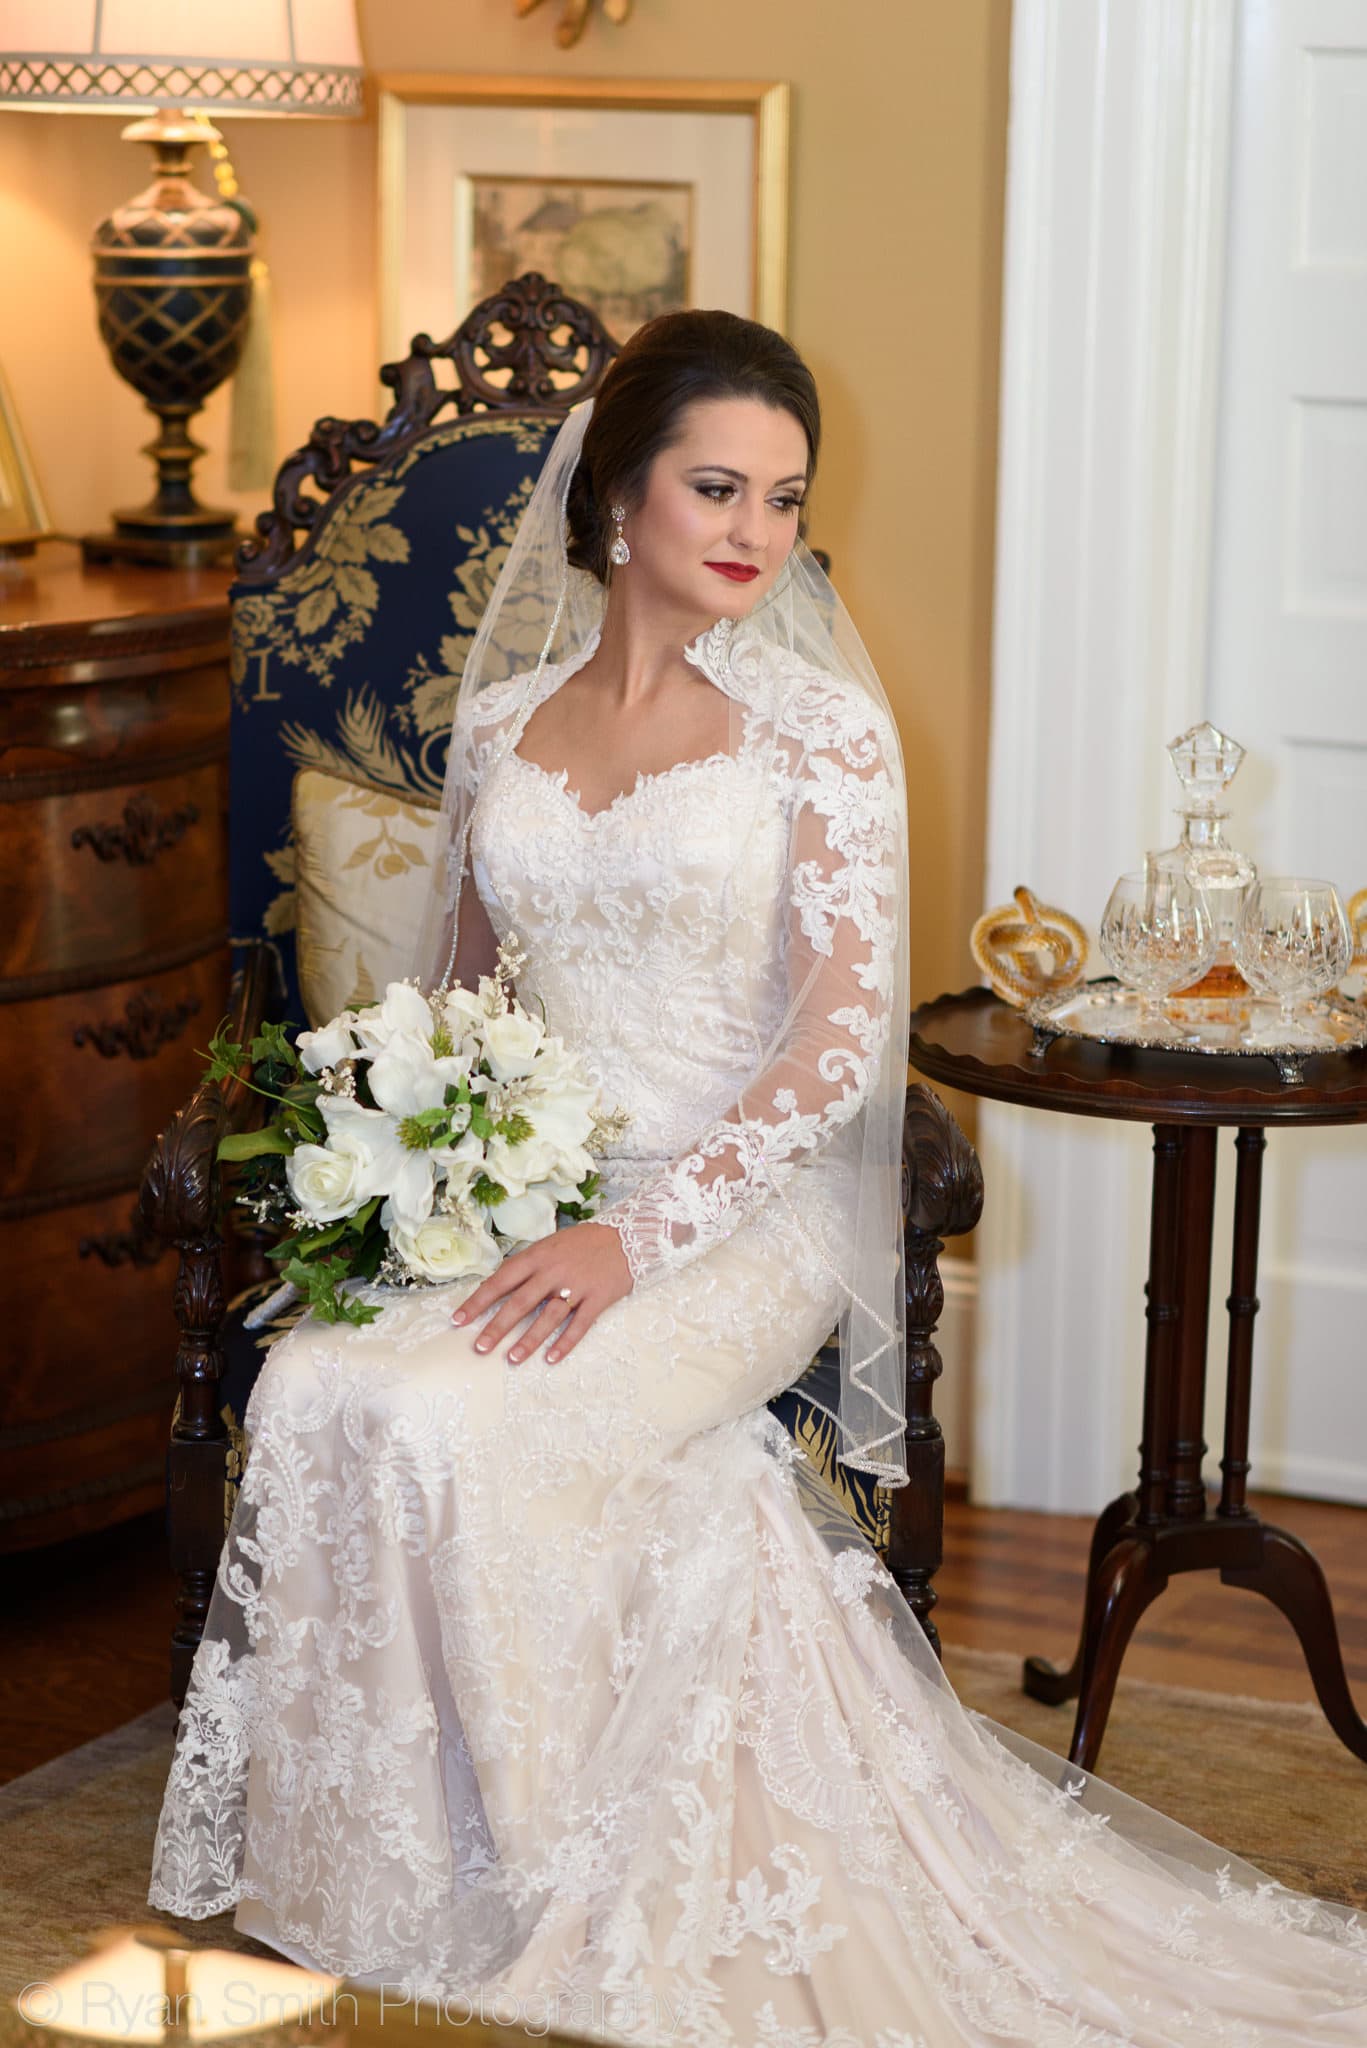 Classic sitting bridal pose - Rosewood Manor - Marion - Rosewood Manor, Marion